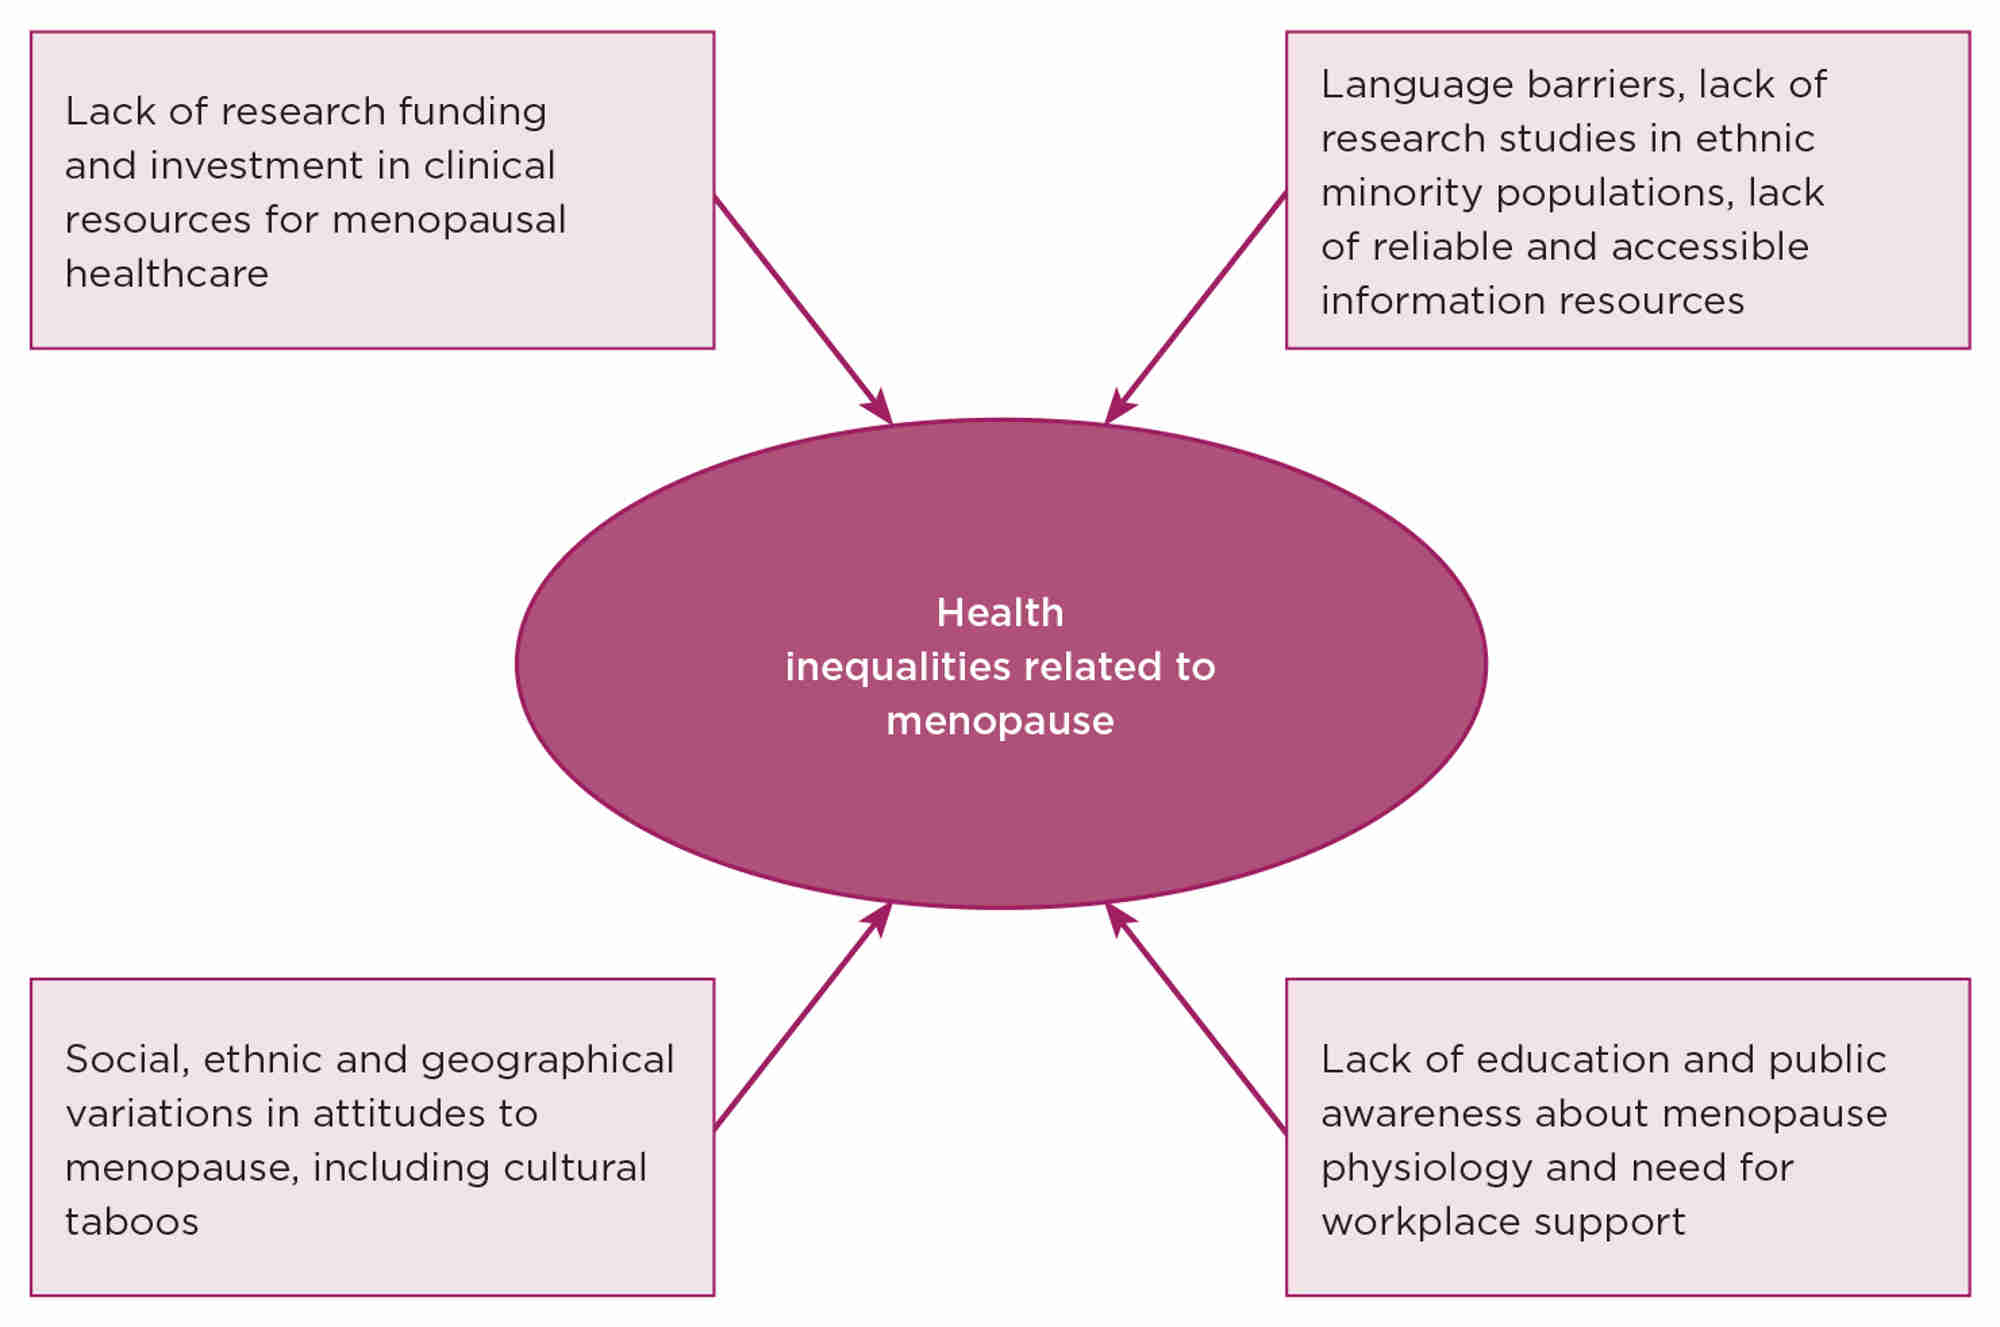 Figure. Factors affecting health inequalities related to menopause.